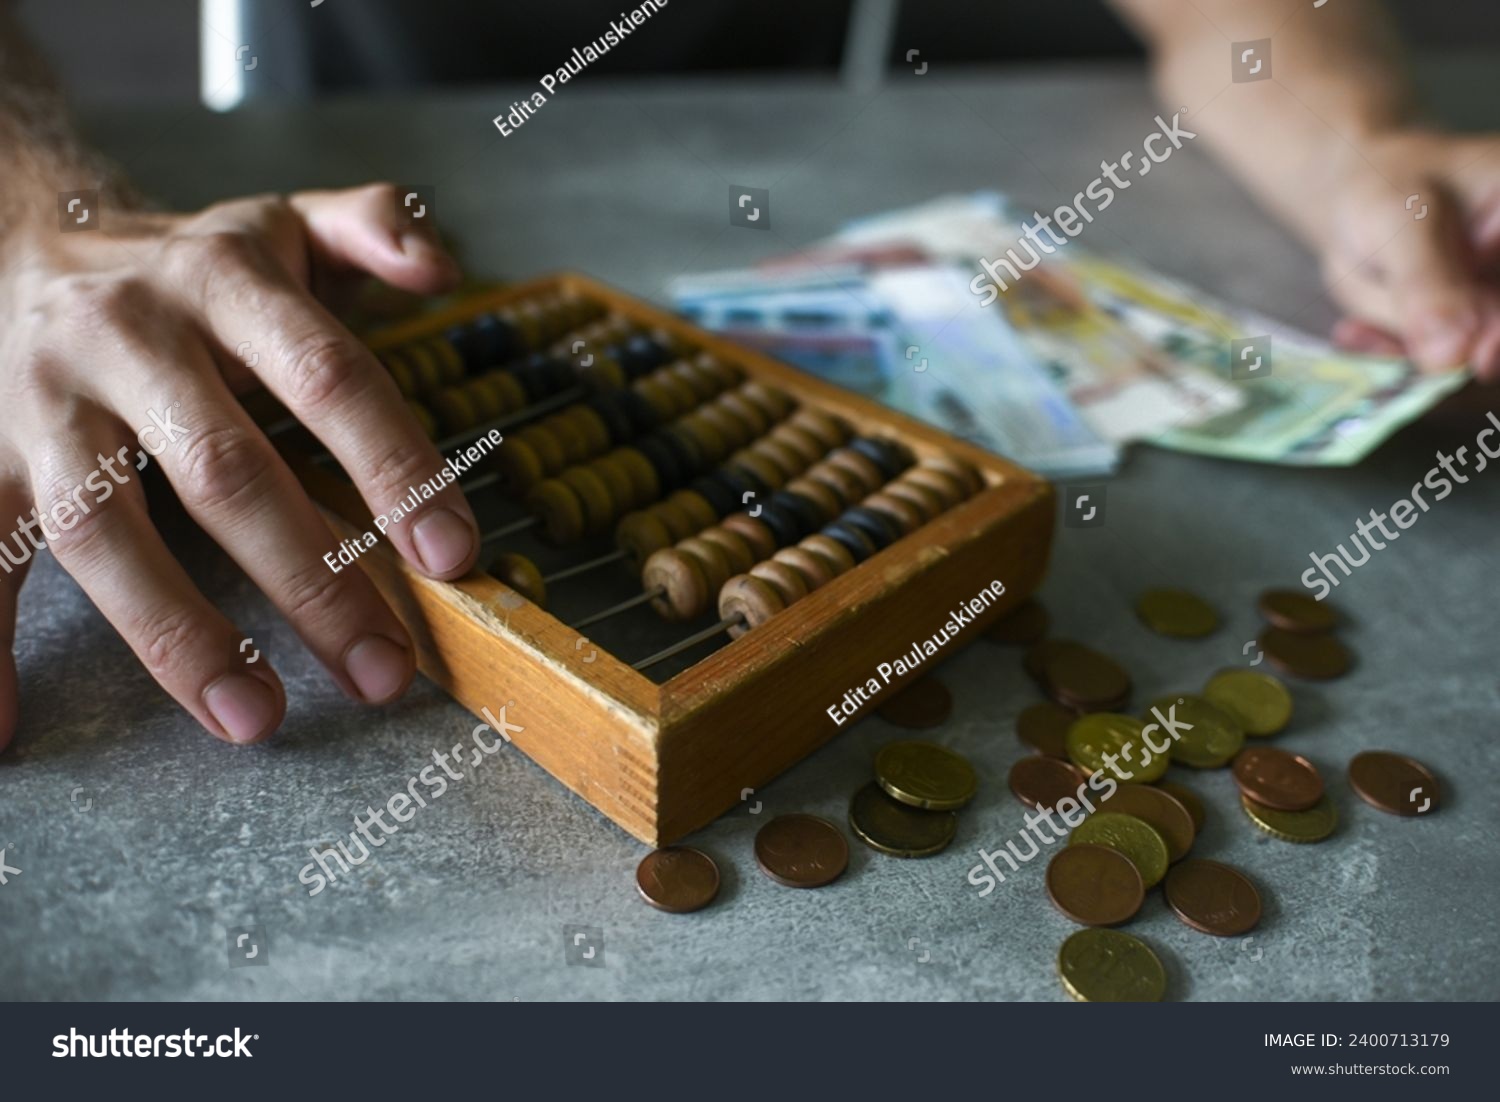 Man hands counting money with old vintage abacus #2400713179